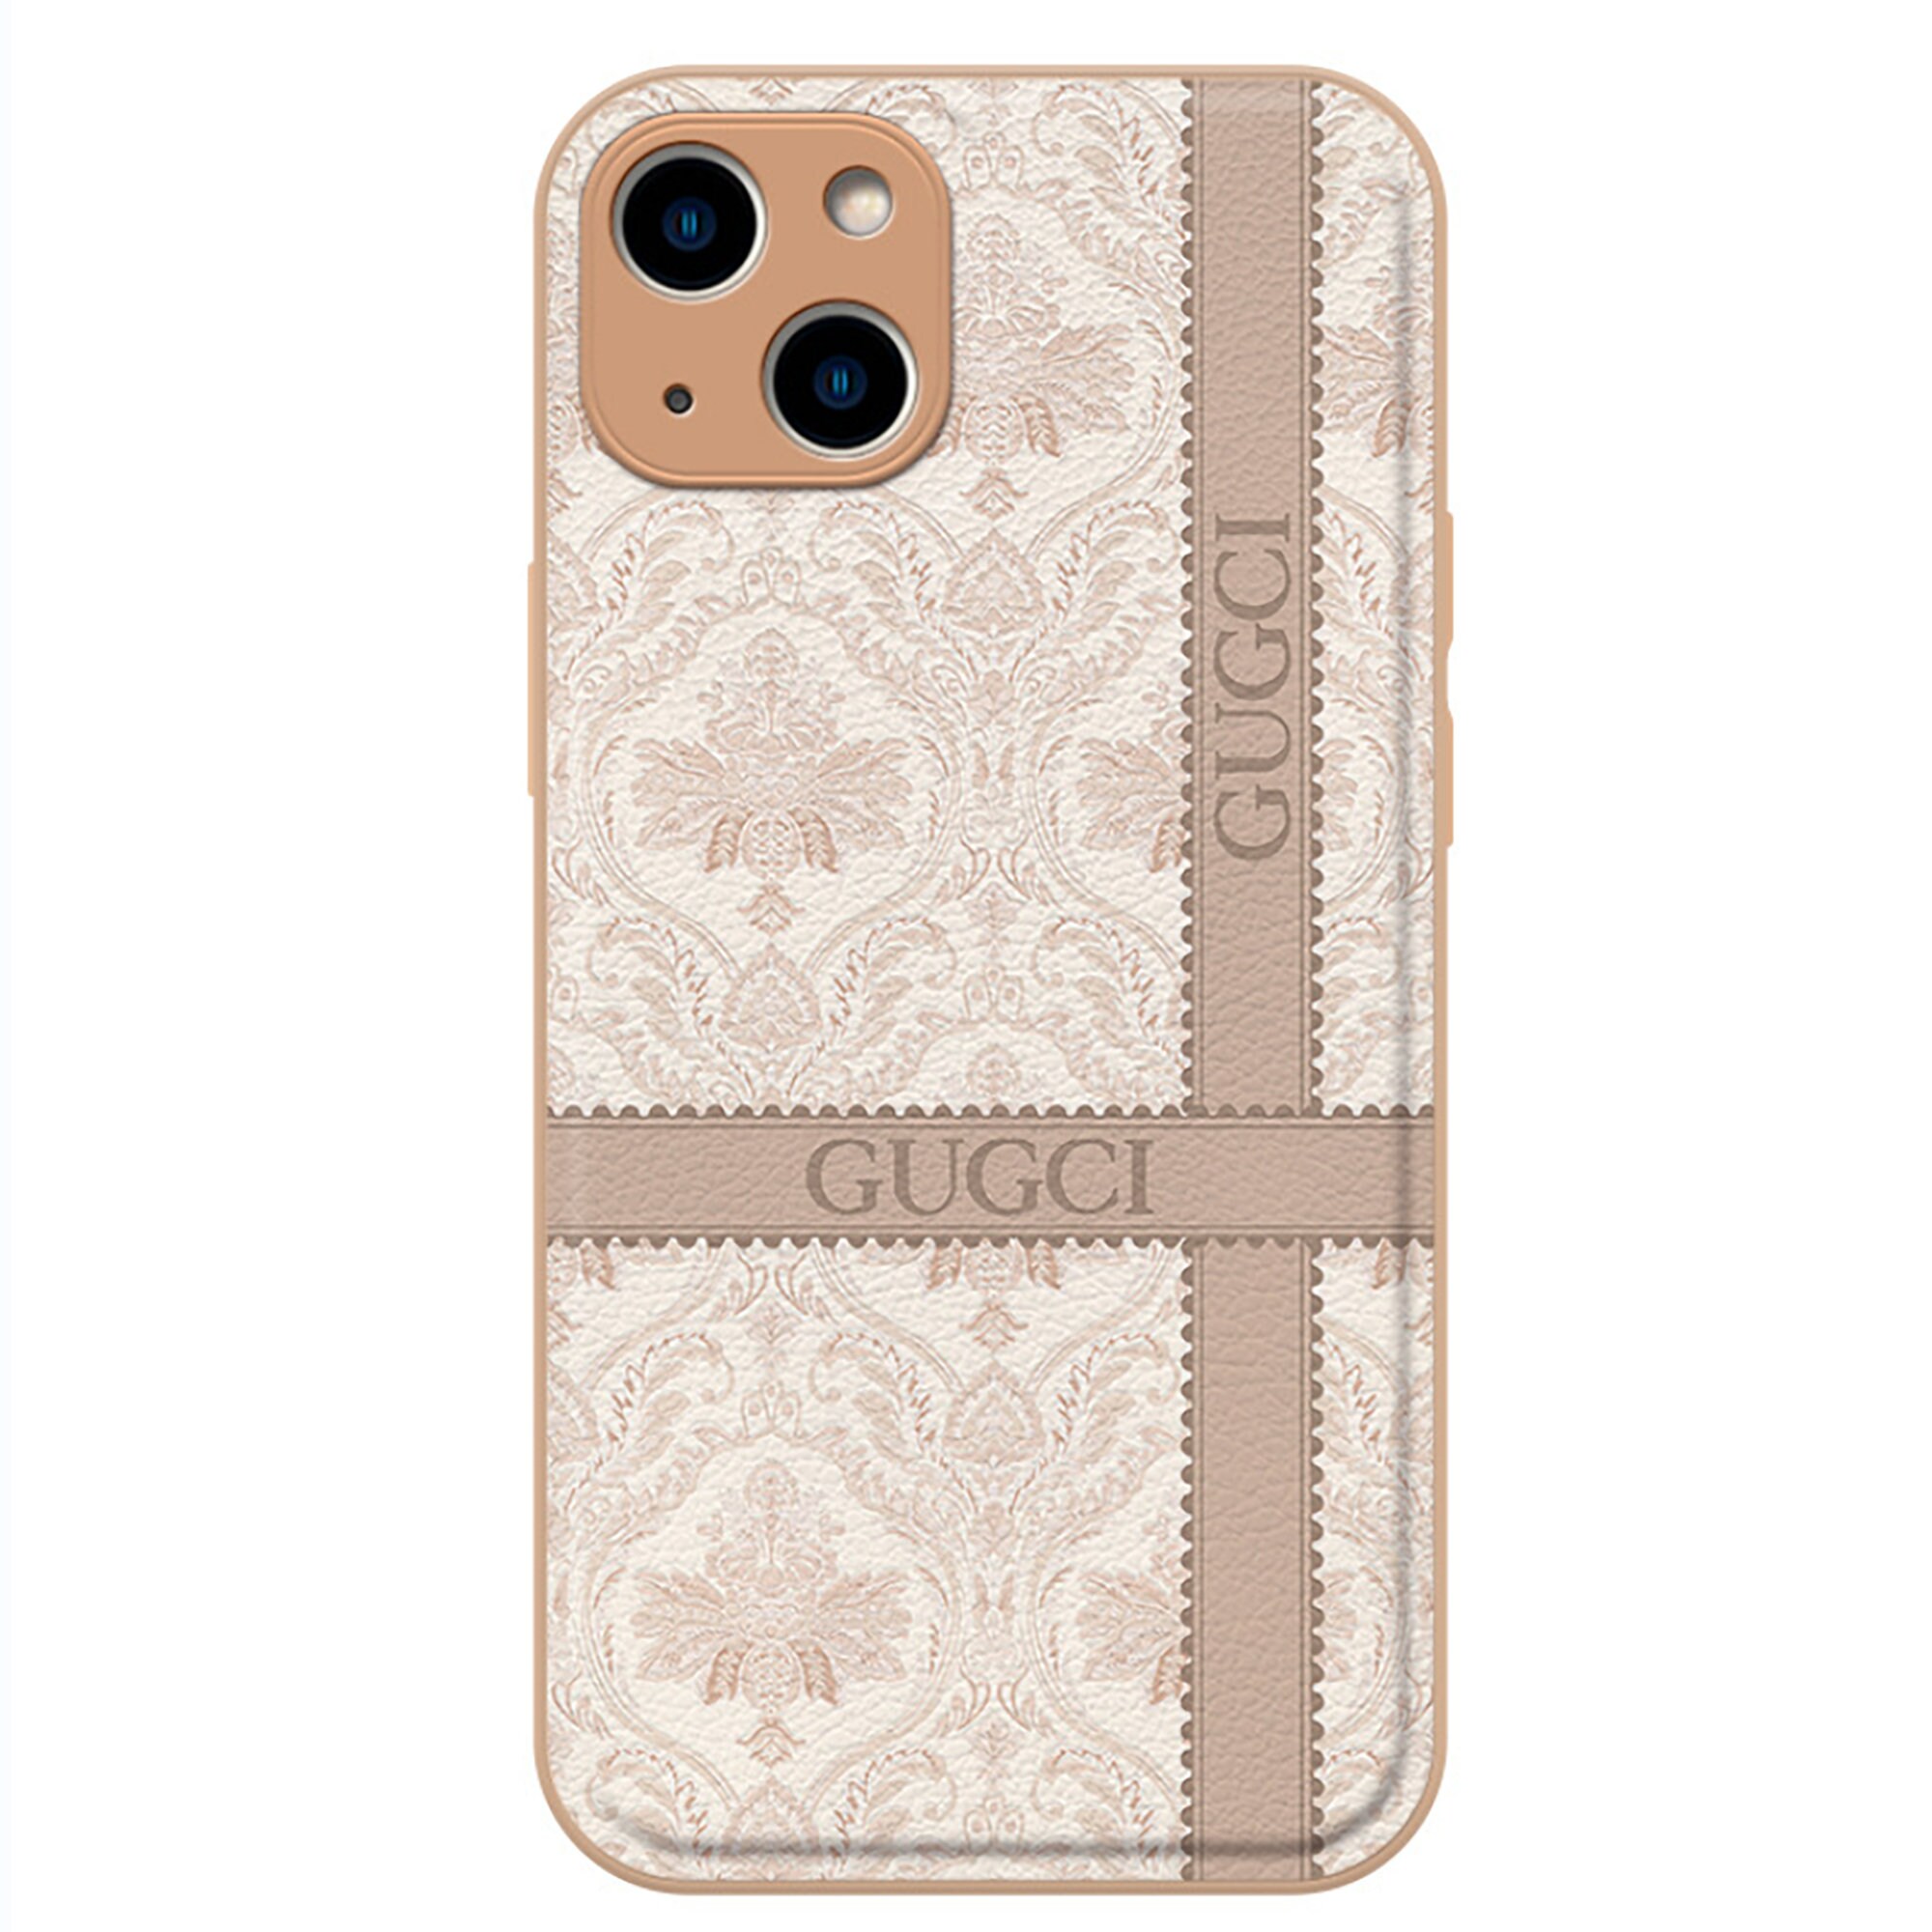 Forced pear retail Michael Kors Iphone - Etsy